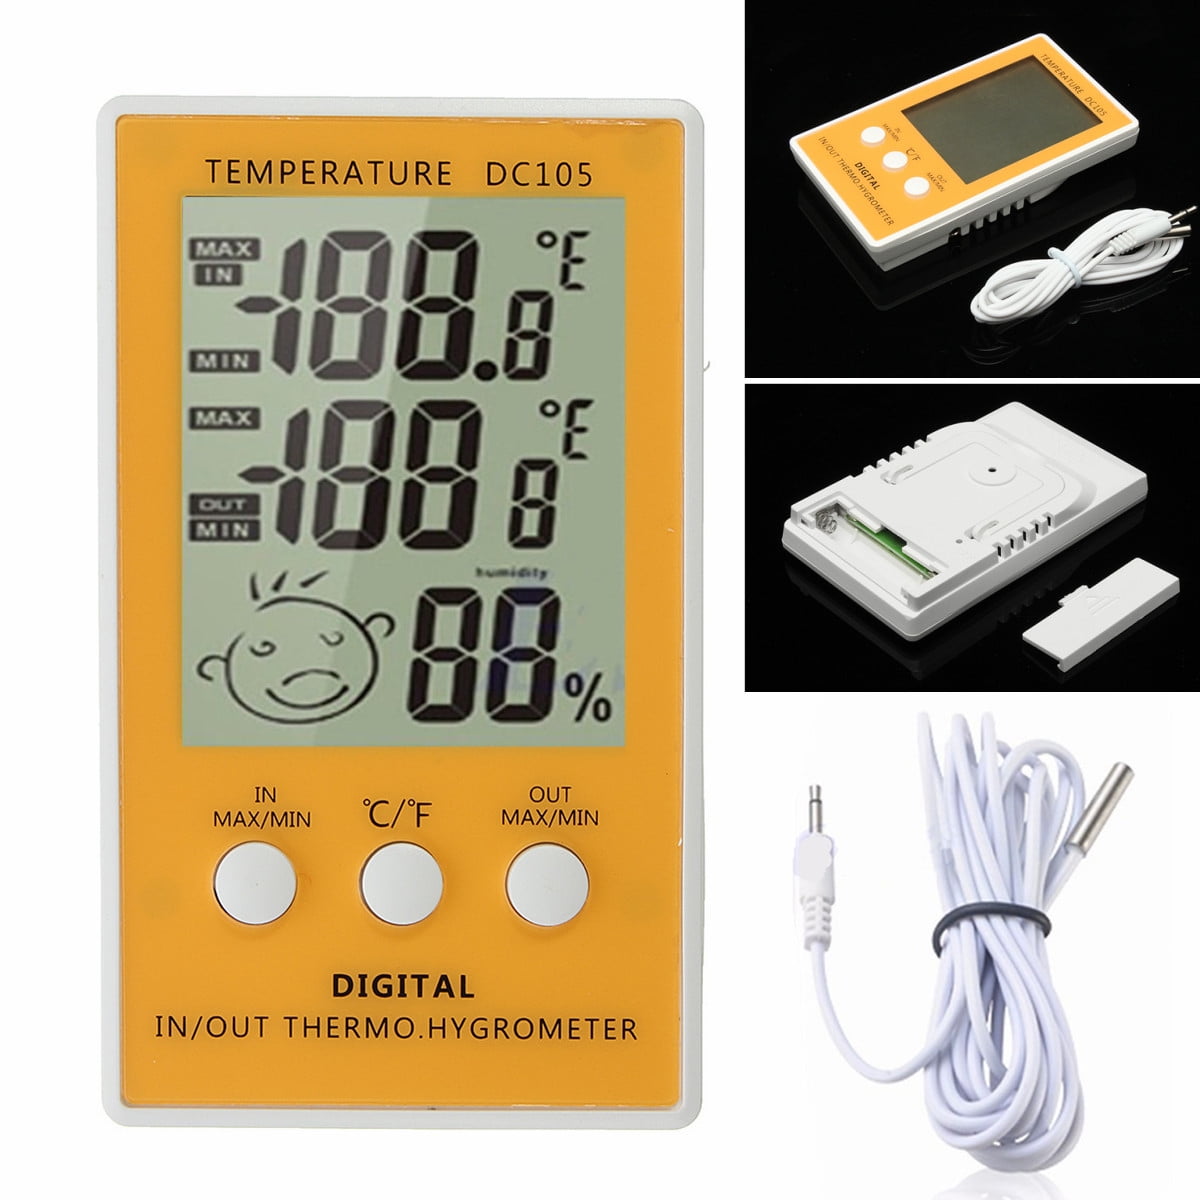 DC105 Hygrometer Digital LCD Indoor Outdoor Humidity Thermometer Meter w Cable